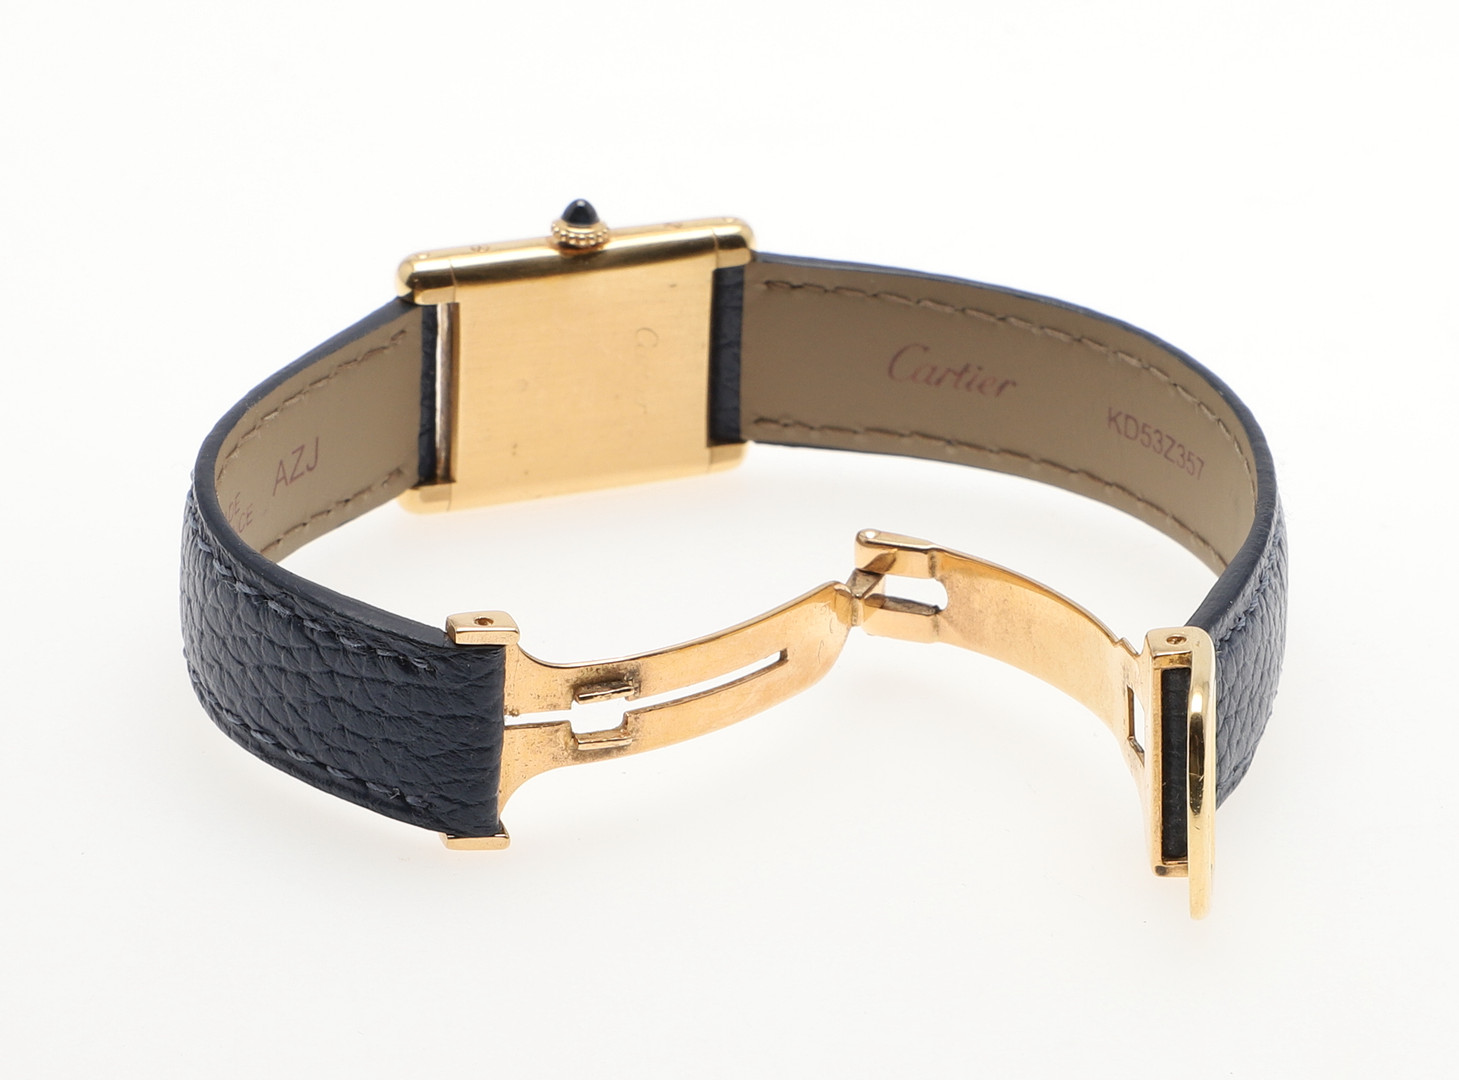 A LADY'S 18CT GOLD TANK WRISTWATCH BY CARTIER. - Image 3 of 7